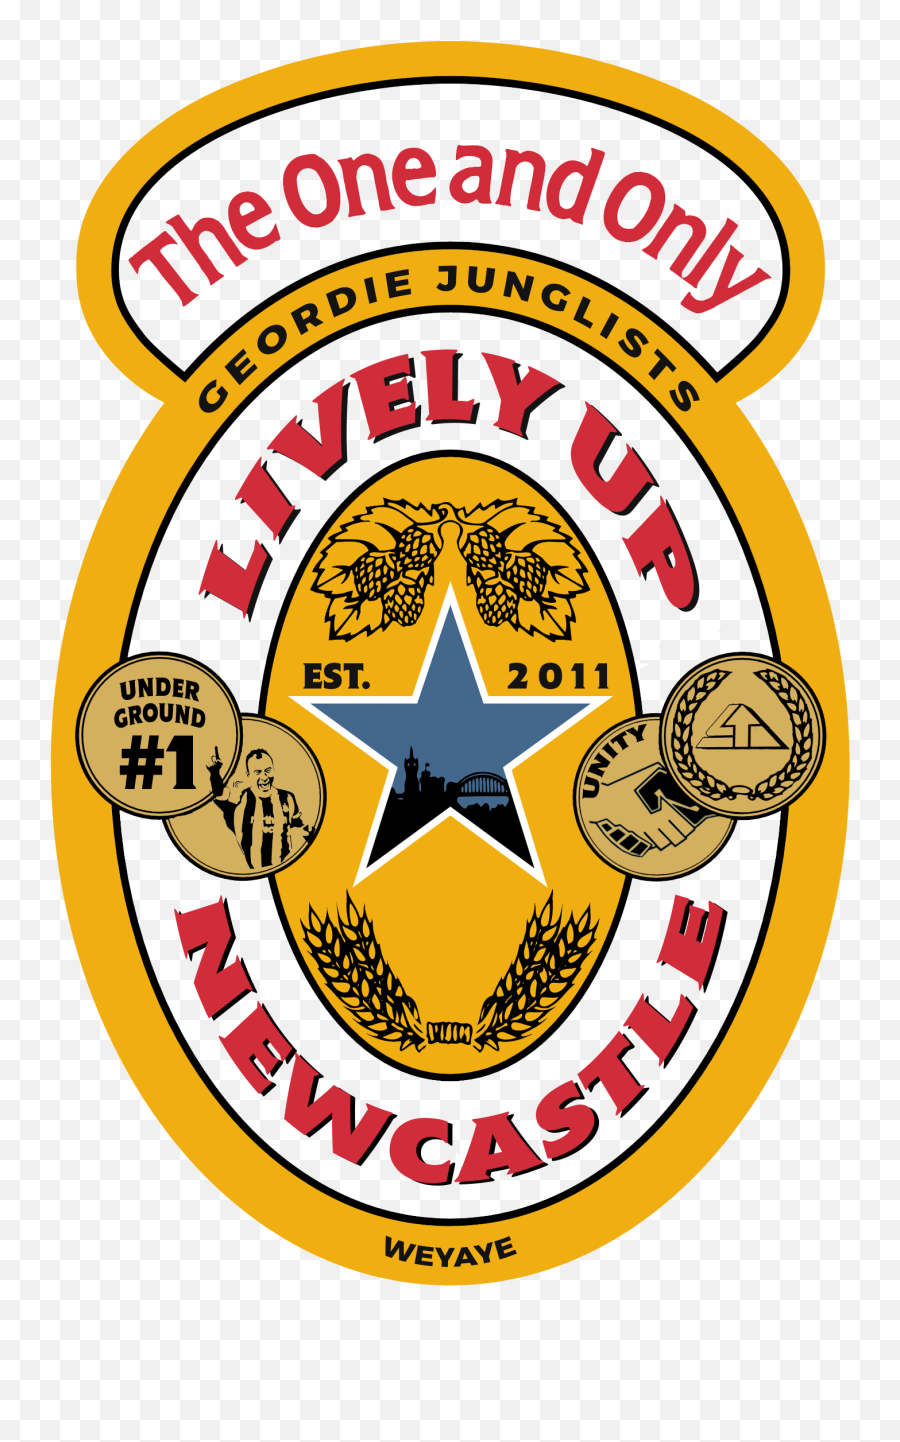 Contact Lively Up Newcastle Emoji,Live Ly Logo